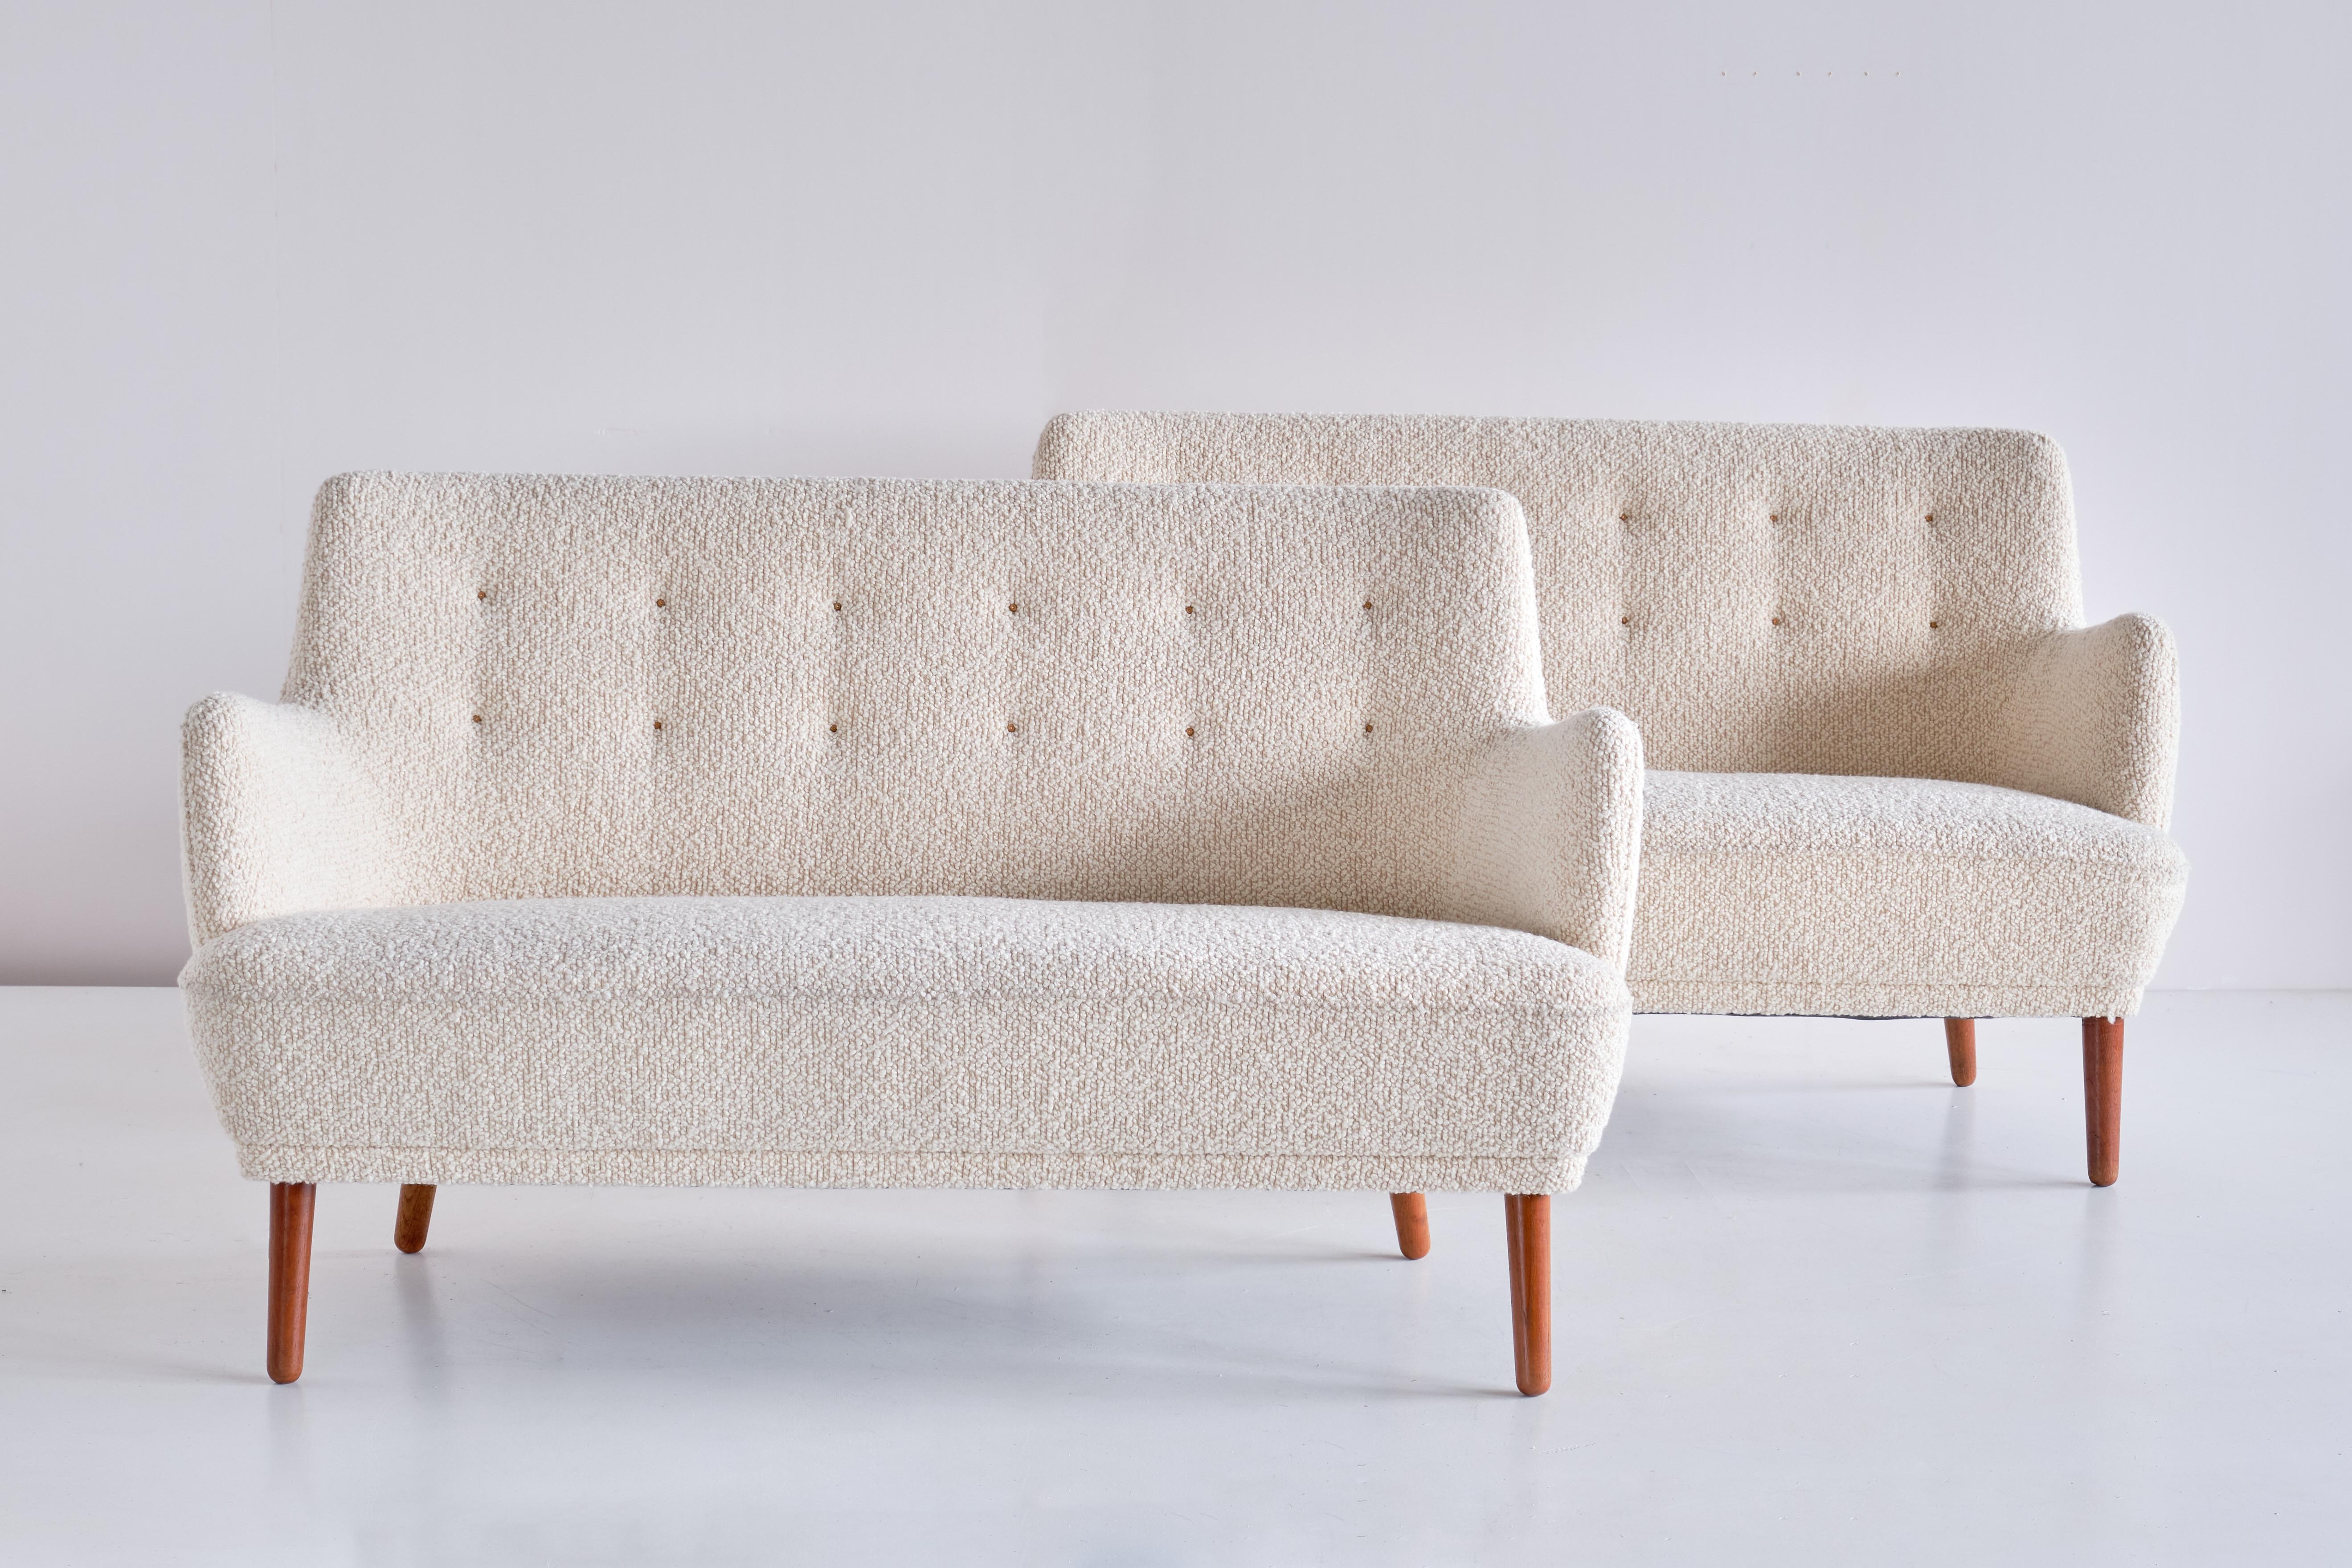 This exceptionally rare two seater sofa was designed by Tove & Edvard Kindt-Larsen and produced by the master cabinet maker Gustav Bertelsen in the early 1950s. The sofa has been newly upholstered in an ivory white wool bouclé fabric with a buttoned